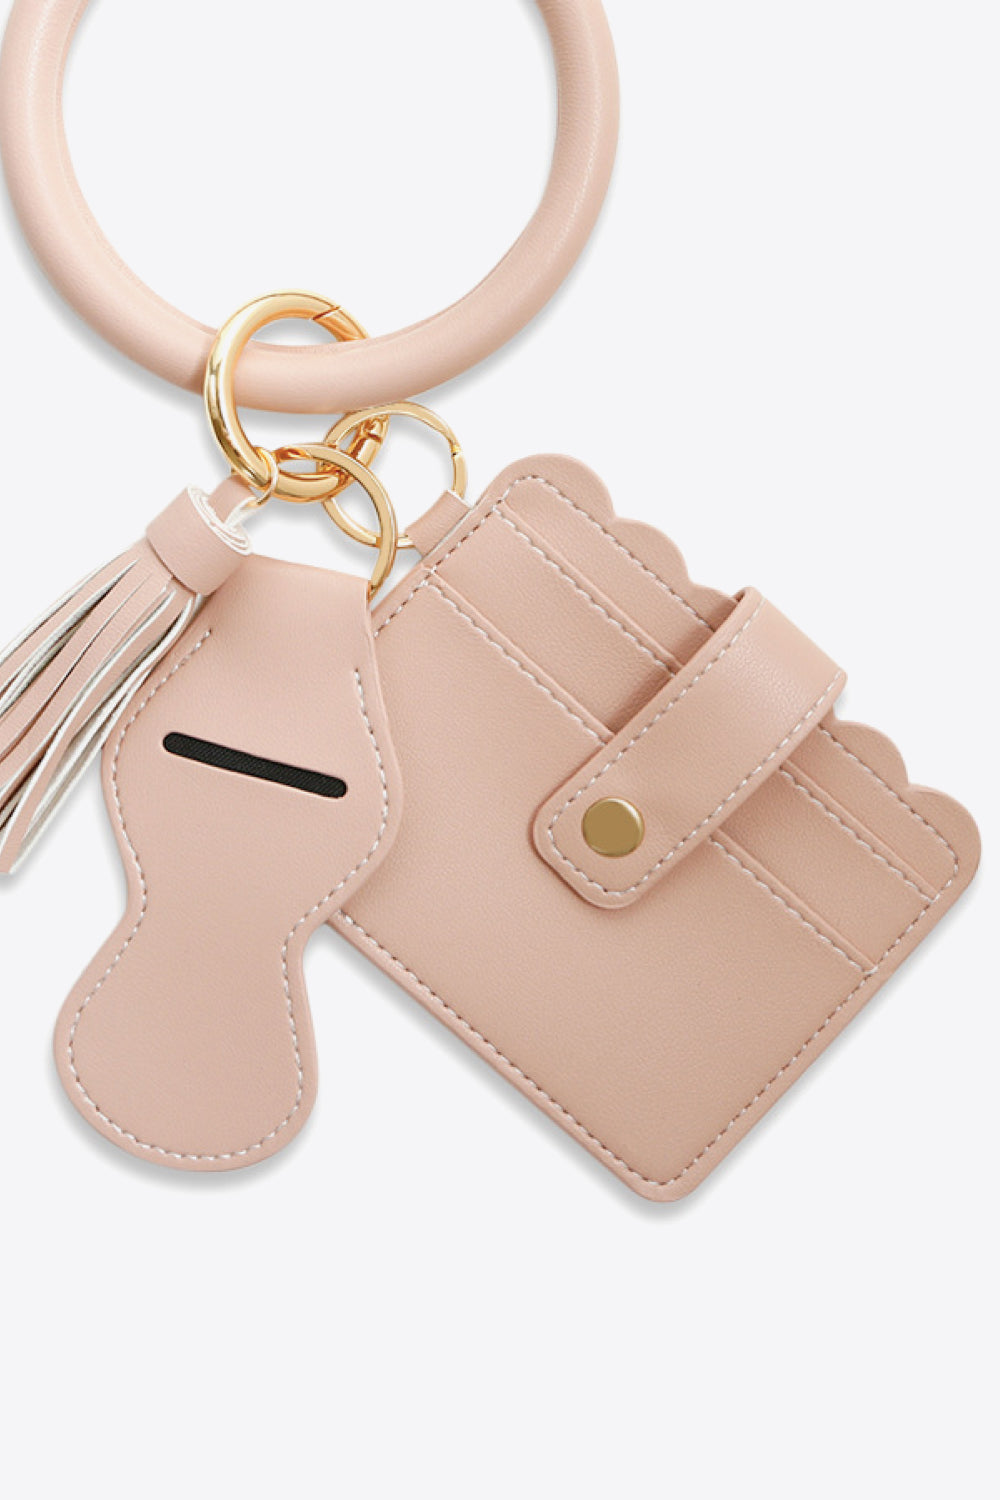 Wristlet Keychain with Card Holder